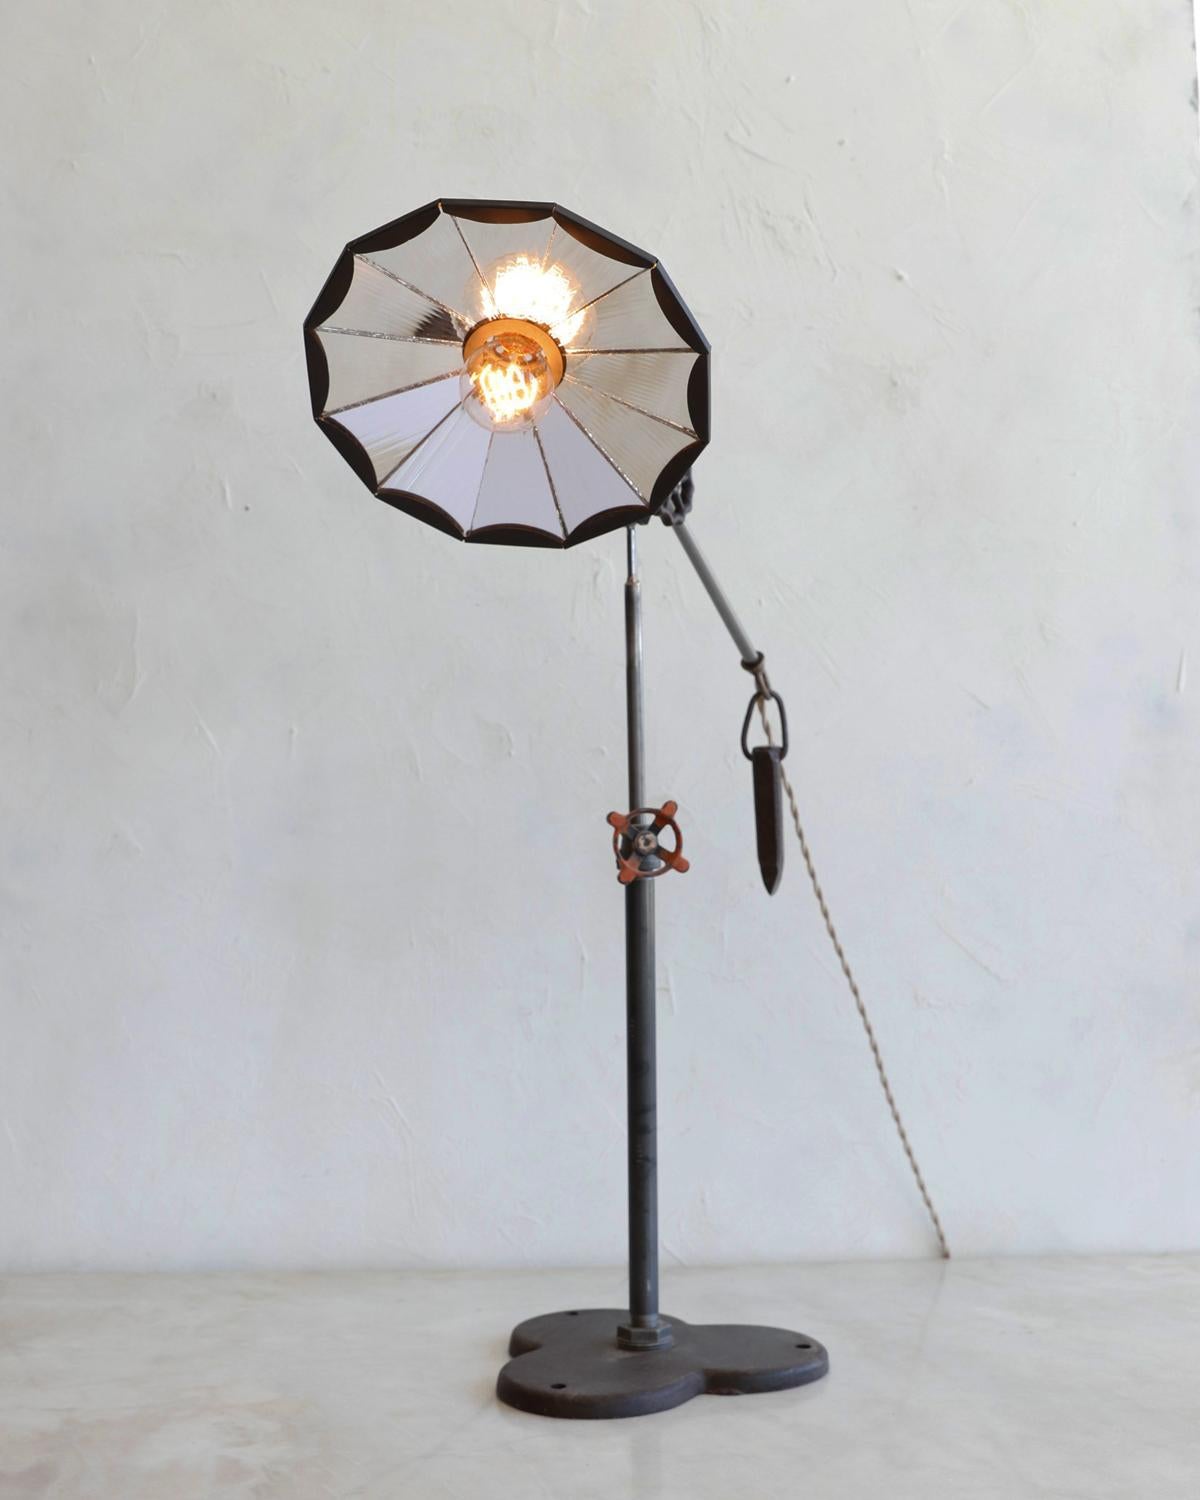 Robert True Ogden's one-of-a-like Found Object Lamps are made by hand in Philadelphia. Crafted from pieces and parts sourced locally and abroad, no two lamps are alike. This table lamp has a ribbon glass mirrored shade with an oil-rubbed brass